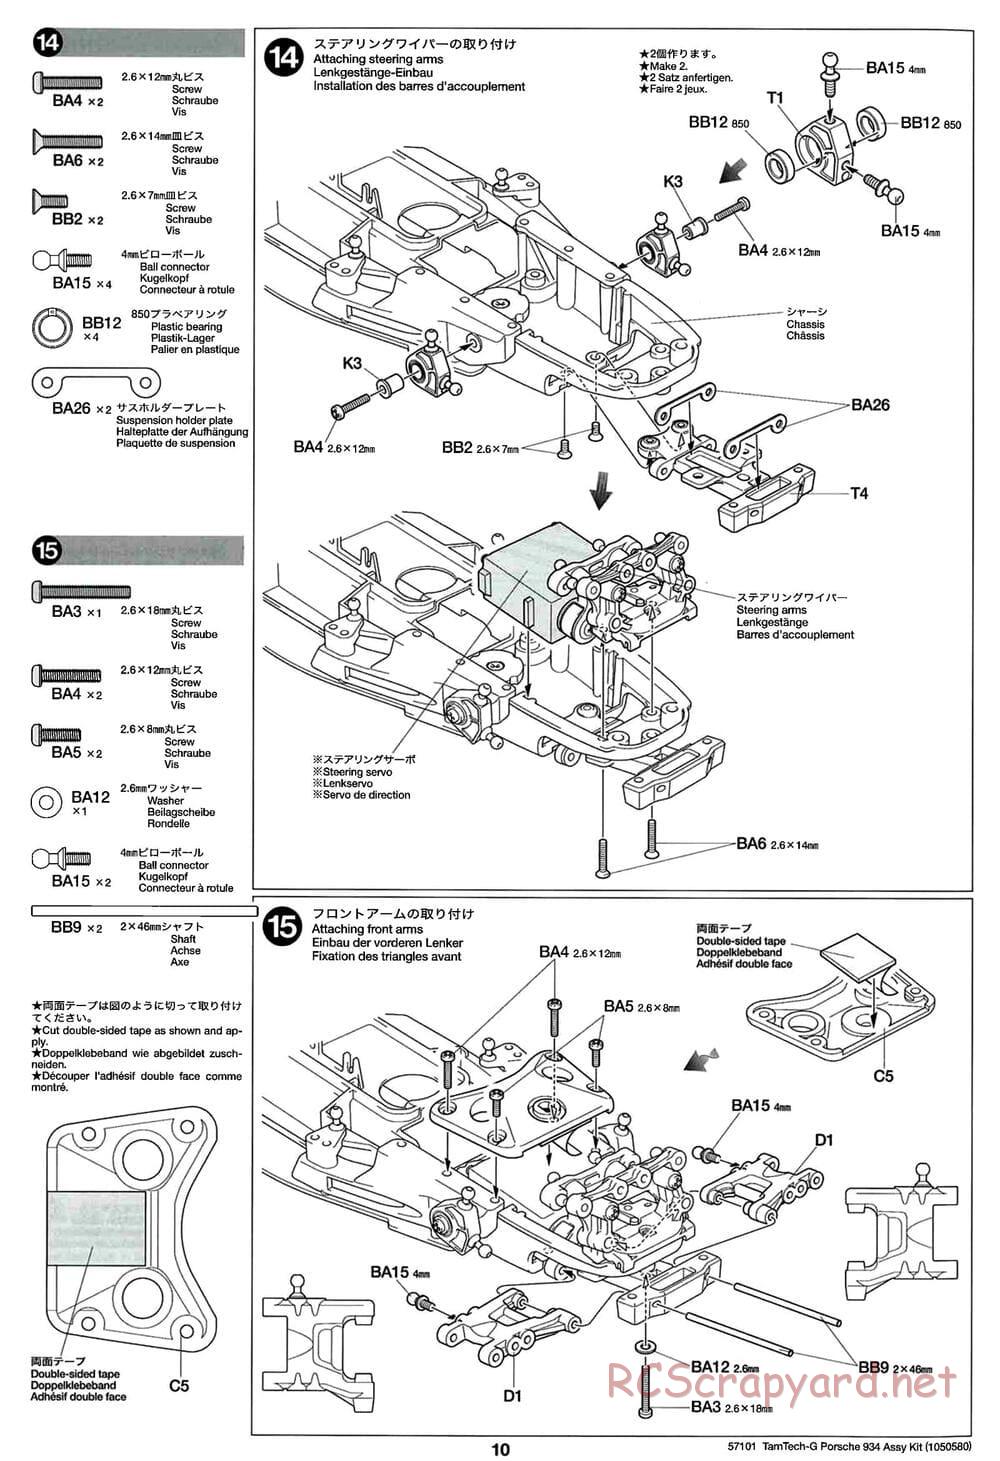 Tamiya - Porsche Turbo RSR - GT-01 Chassis - Manual - Page 10